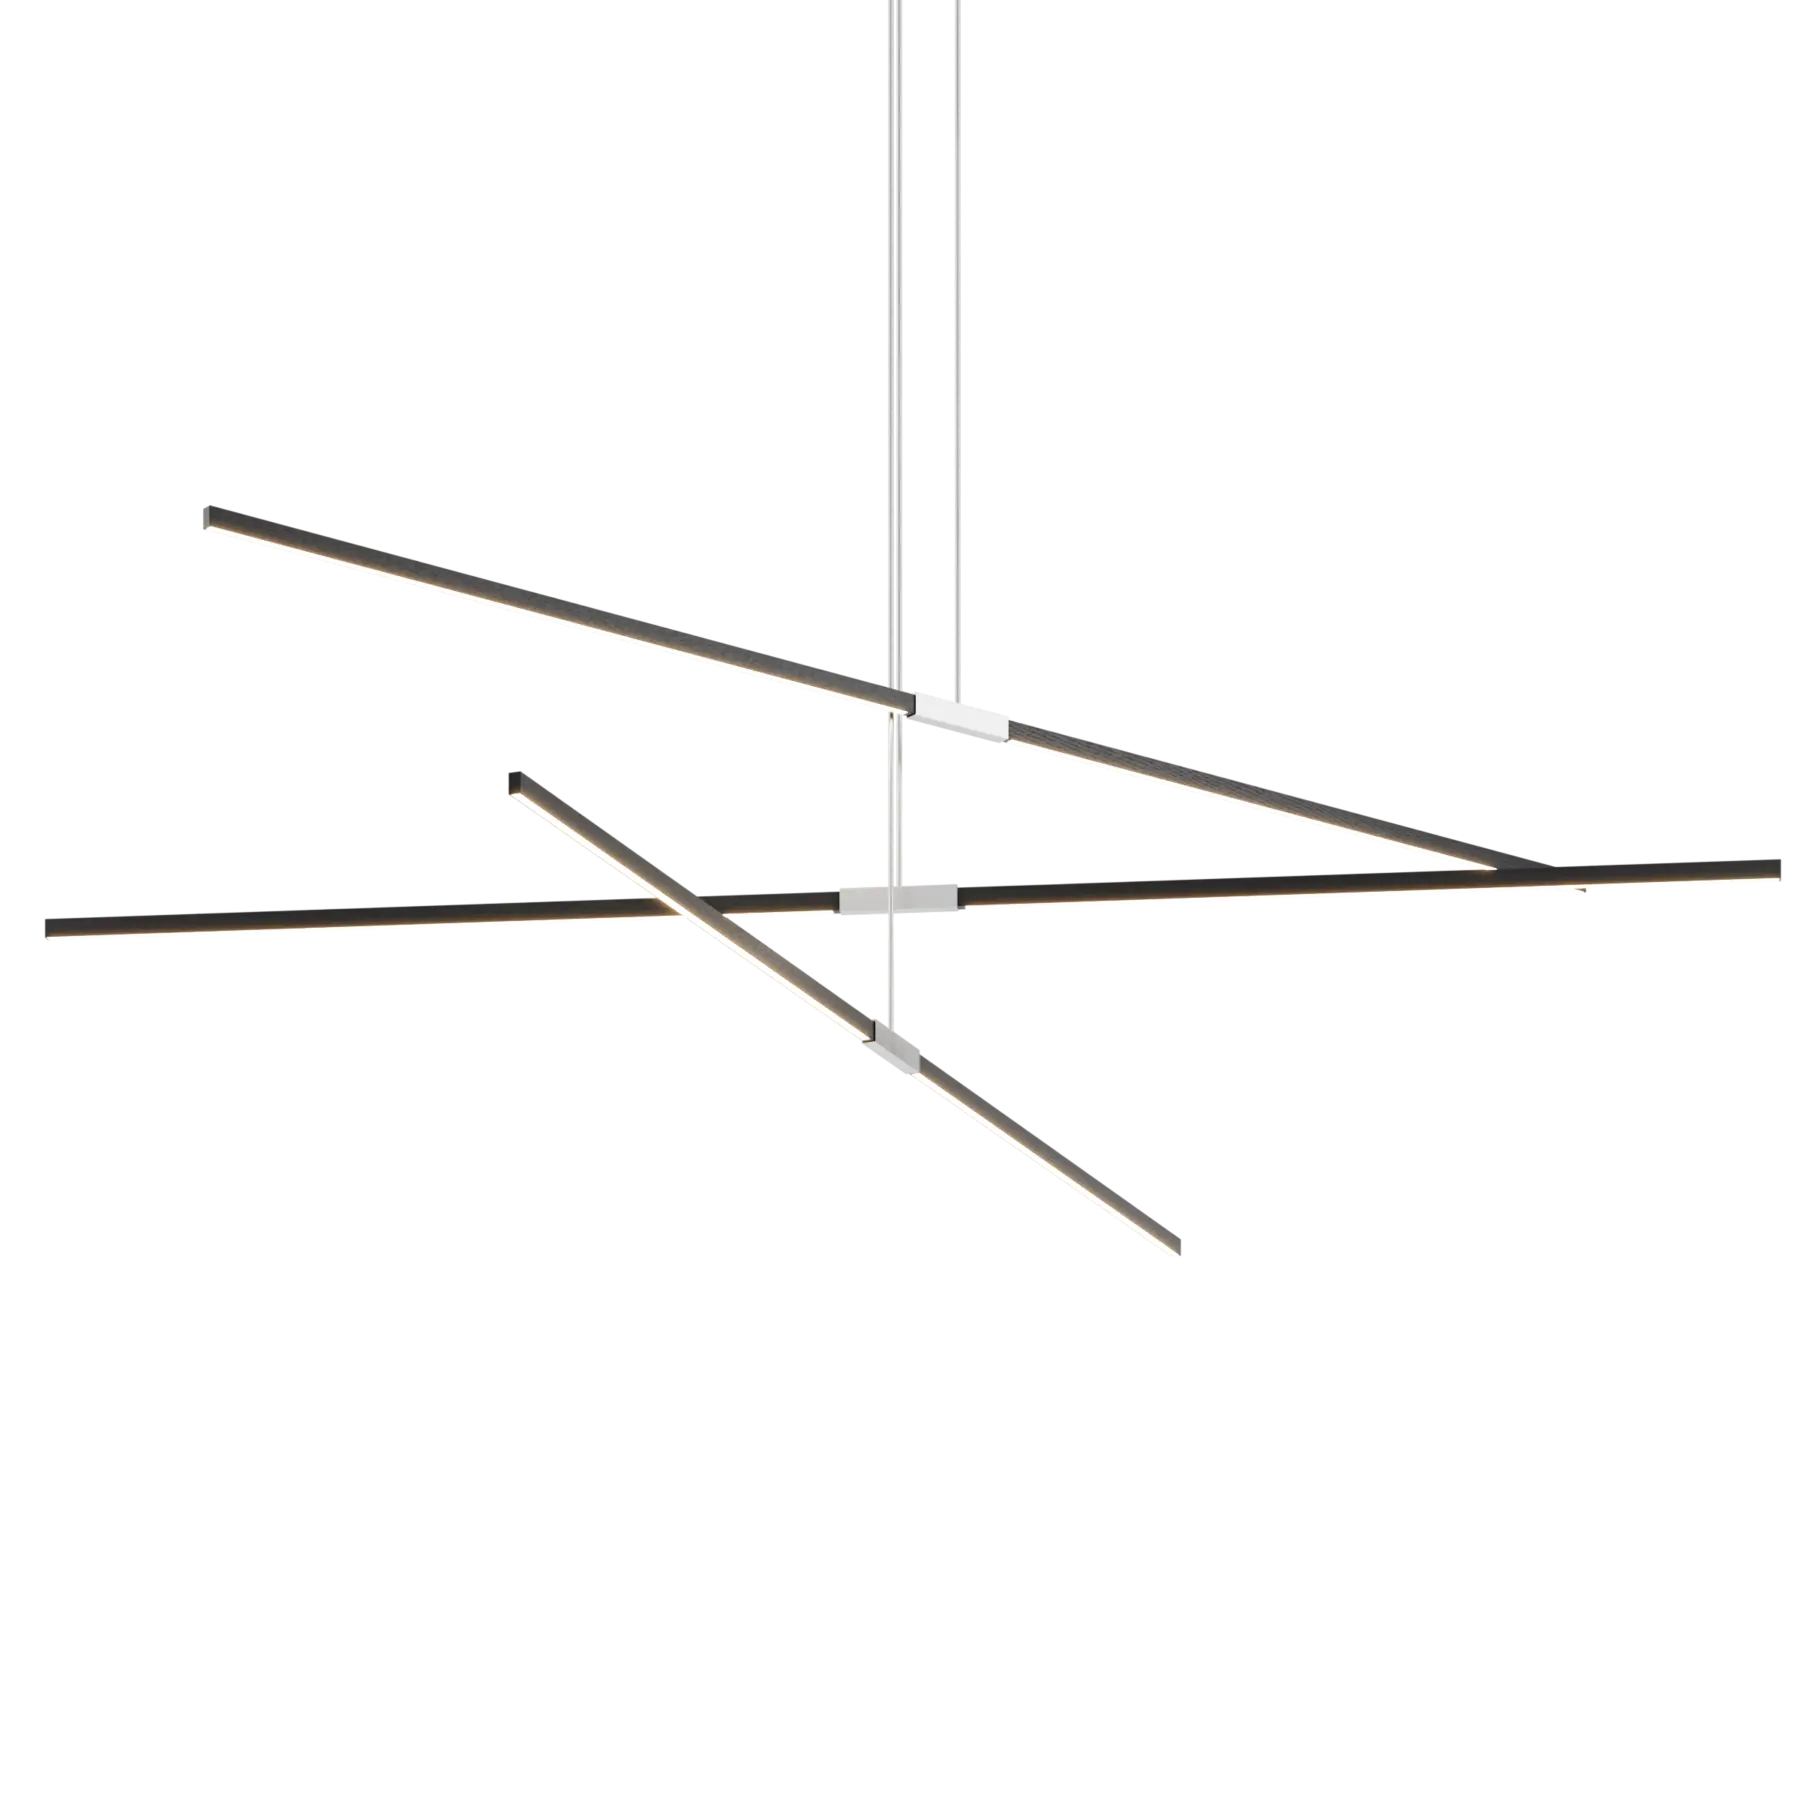 Image of a Stickbulb Multiple Linear Pendant lighting fixture. The modern fixture consists of sleek wooden beams with multiple integrated LED bulbs.